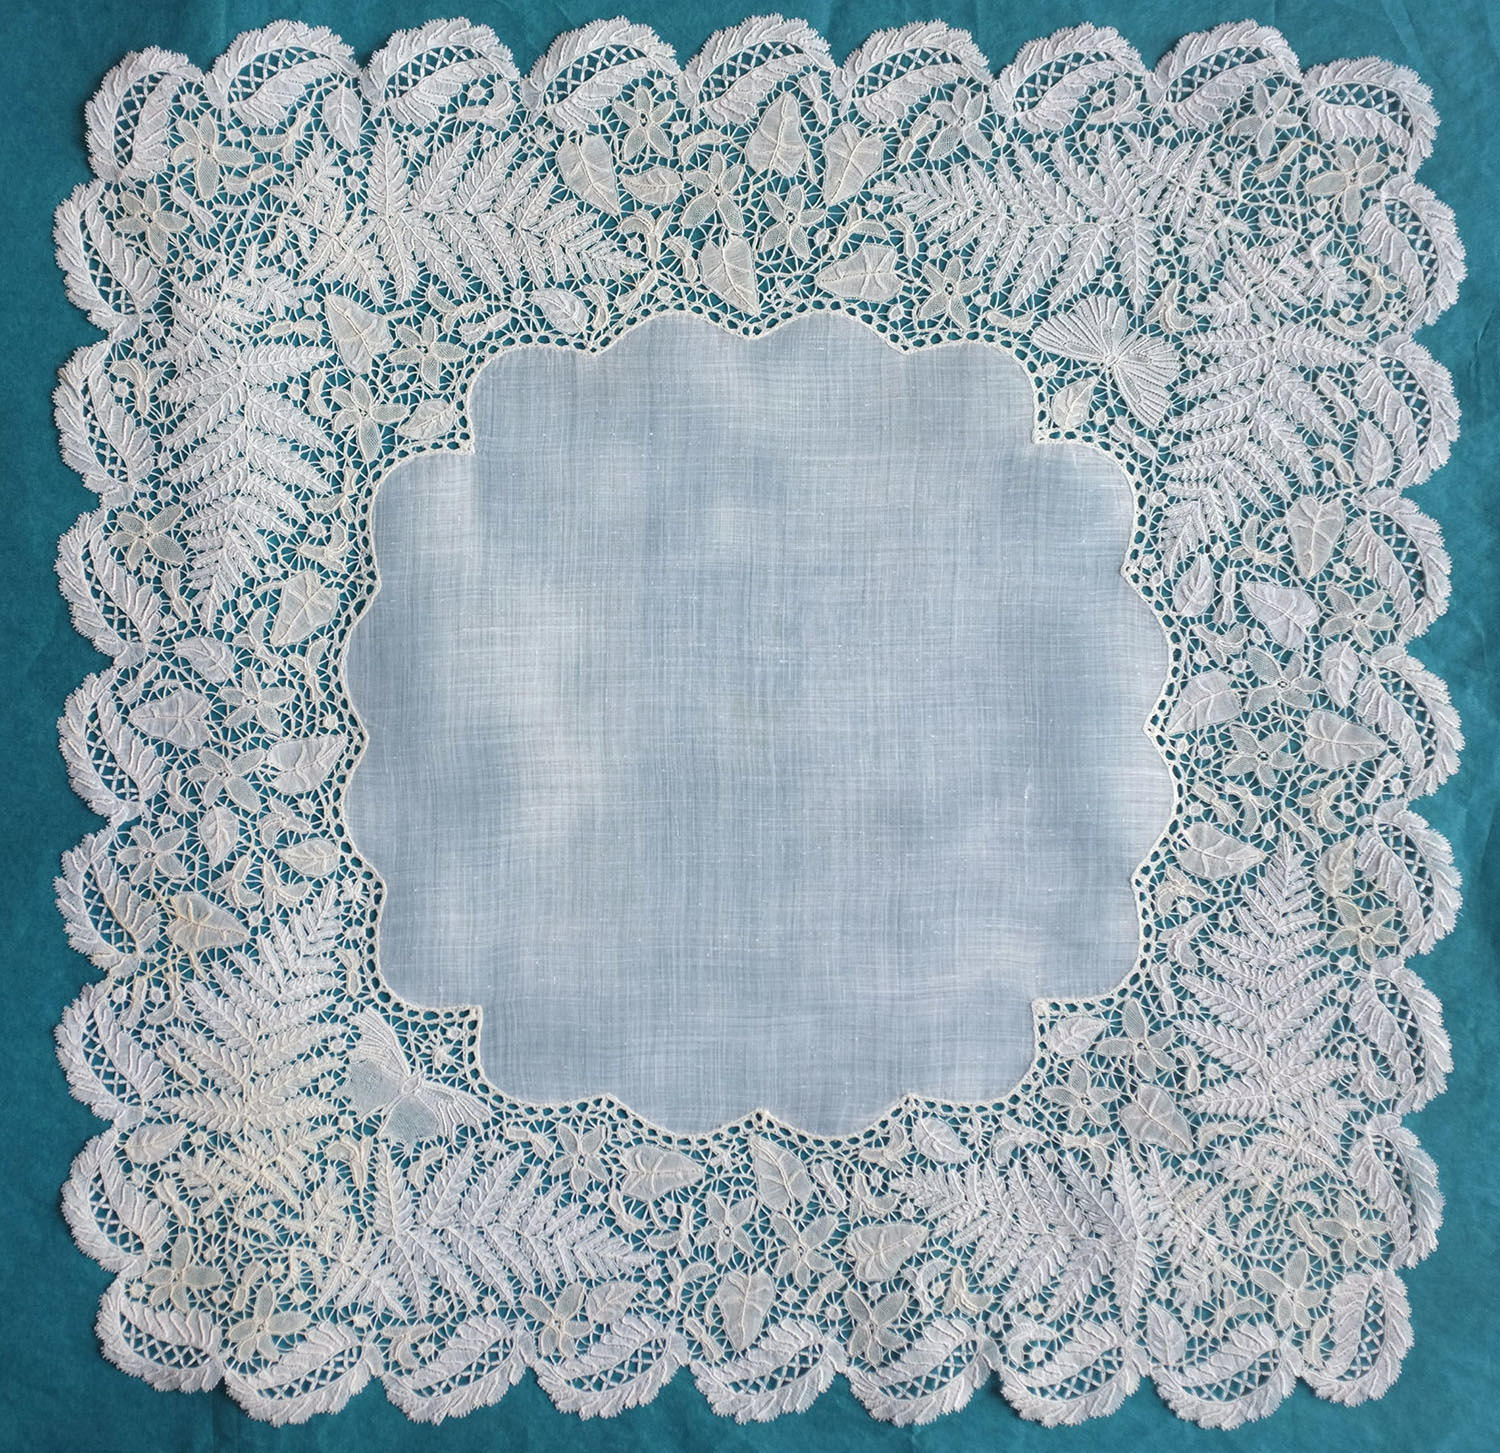 Honiton Lace Handkerchief with Ferns and Butterflies